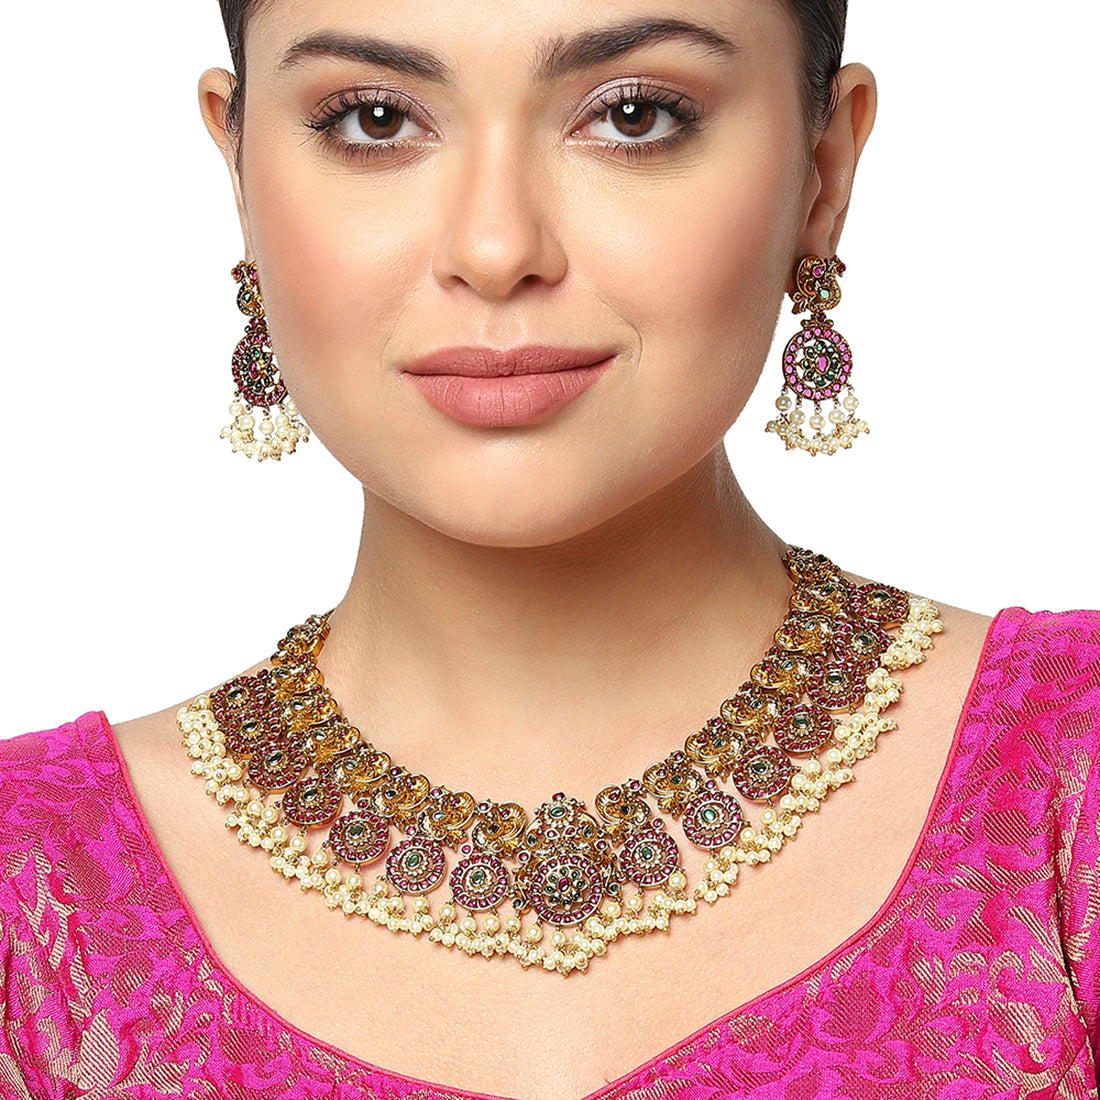 Round Cut Gems and Faux Pearls Embellished Brass Ethnic Gold Toned Jewellery Set